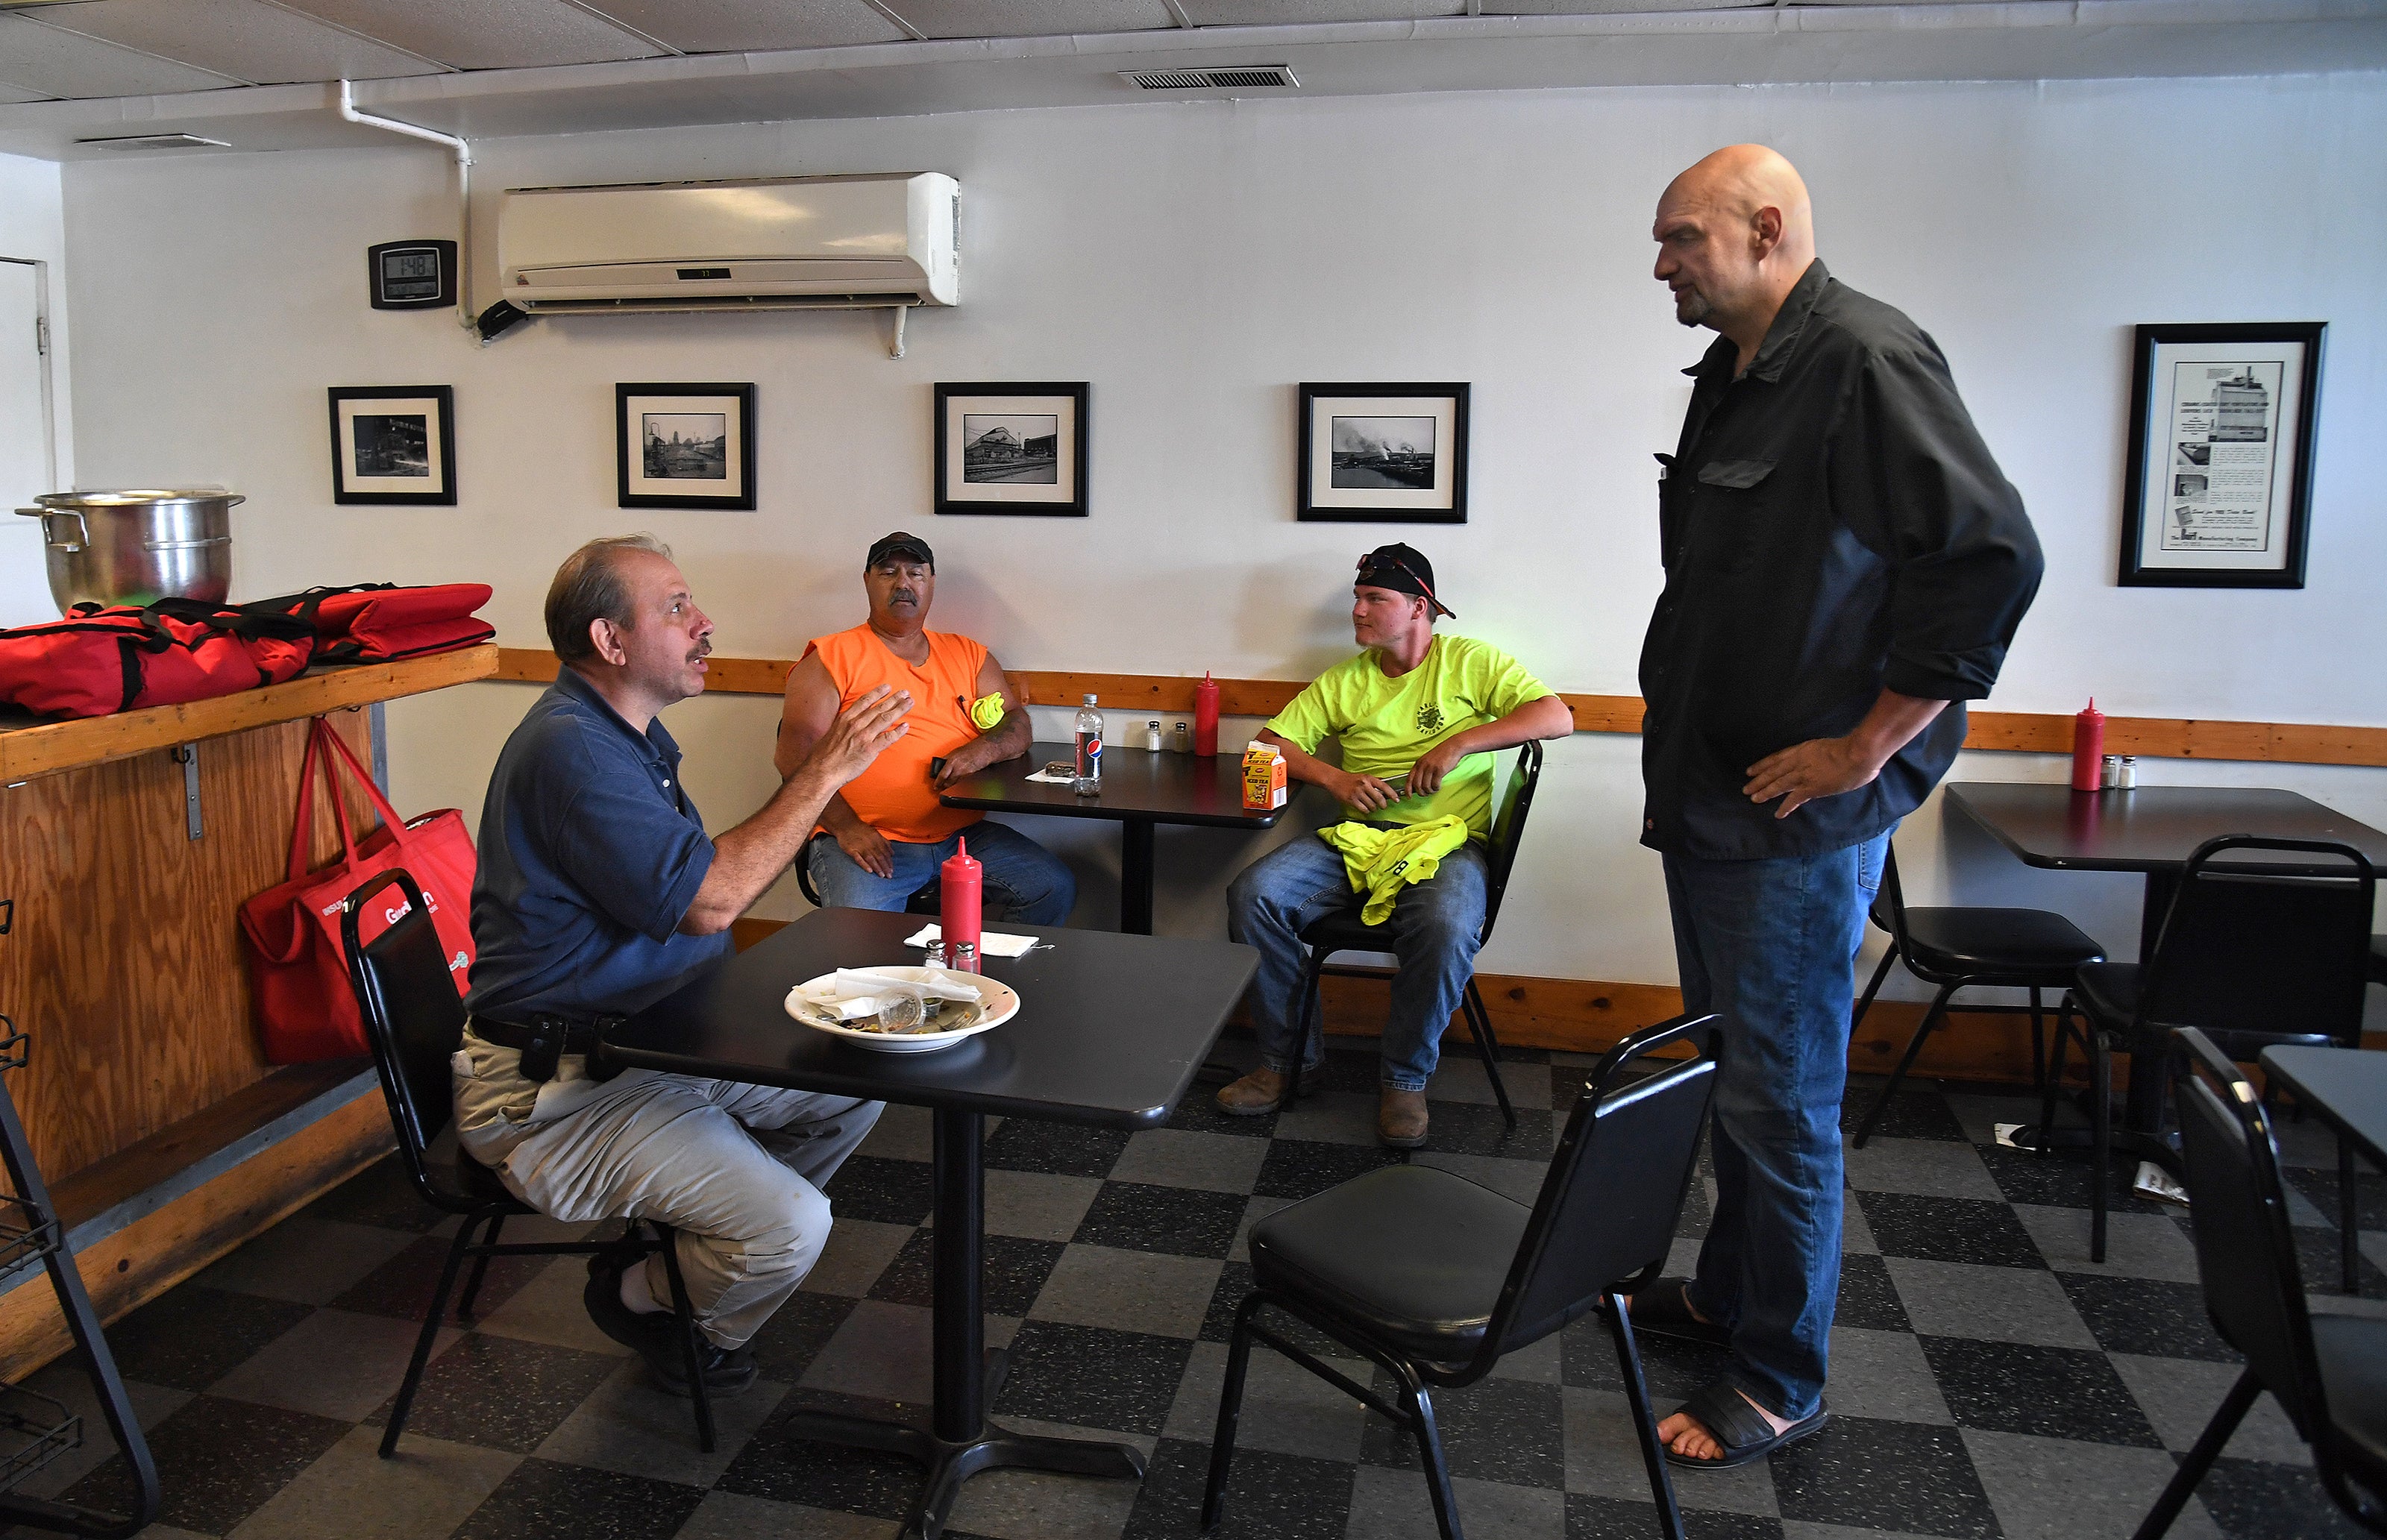 Mayor John Fetterman strikes up a conversation with (L) Chuck Shoaf at a diner in the town of Clairton, Pennsylvania, on June 10, 2018.